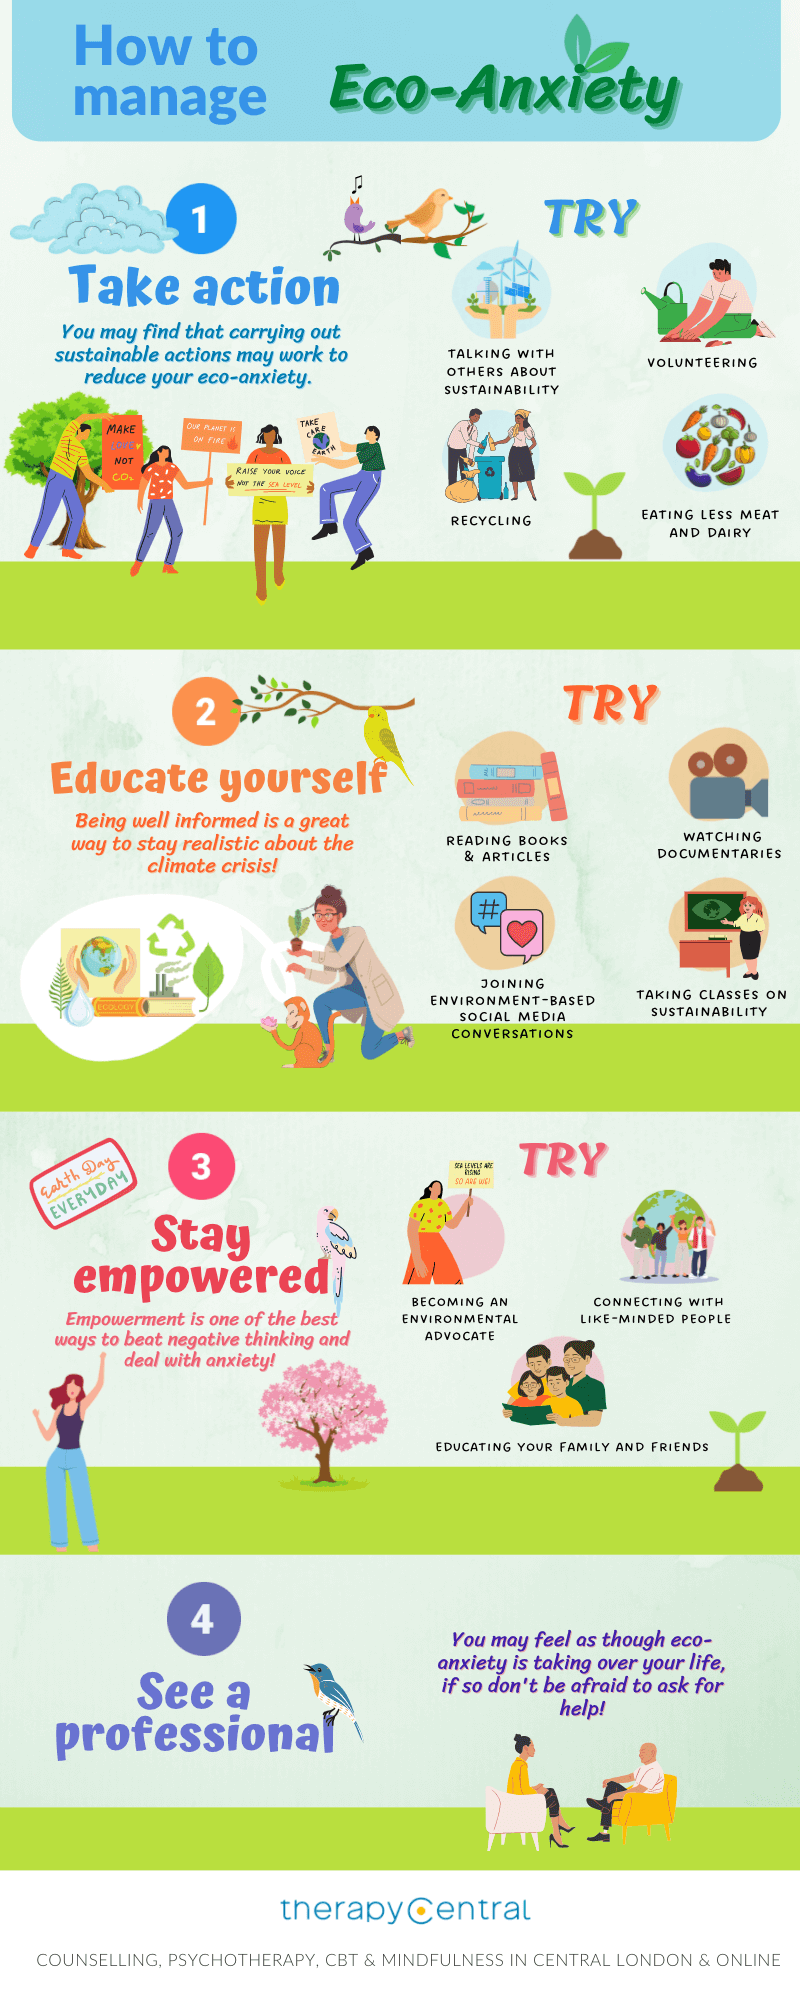 What is eco-anxiety and how to manage it - Infographic 2